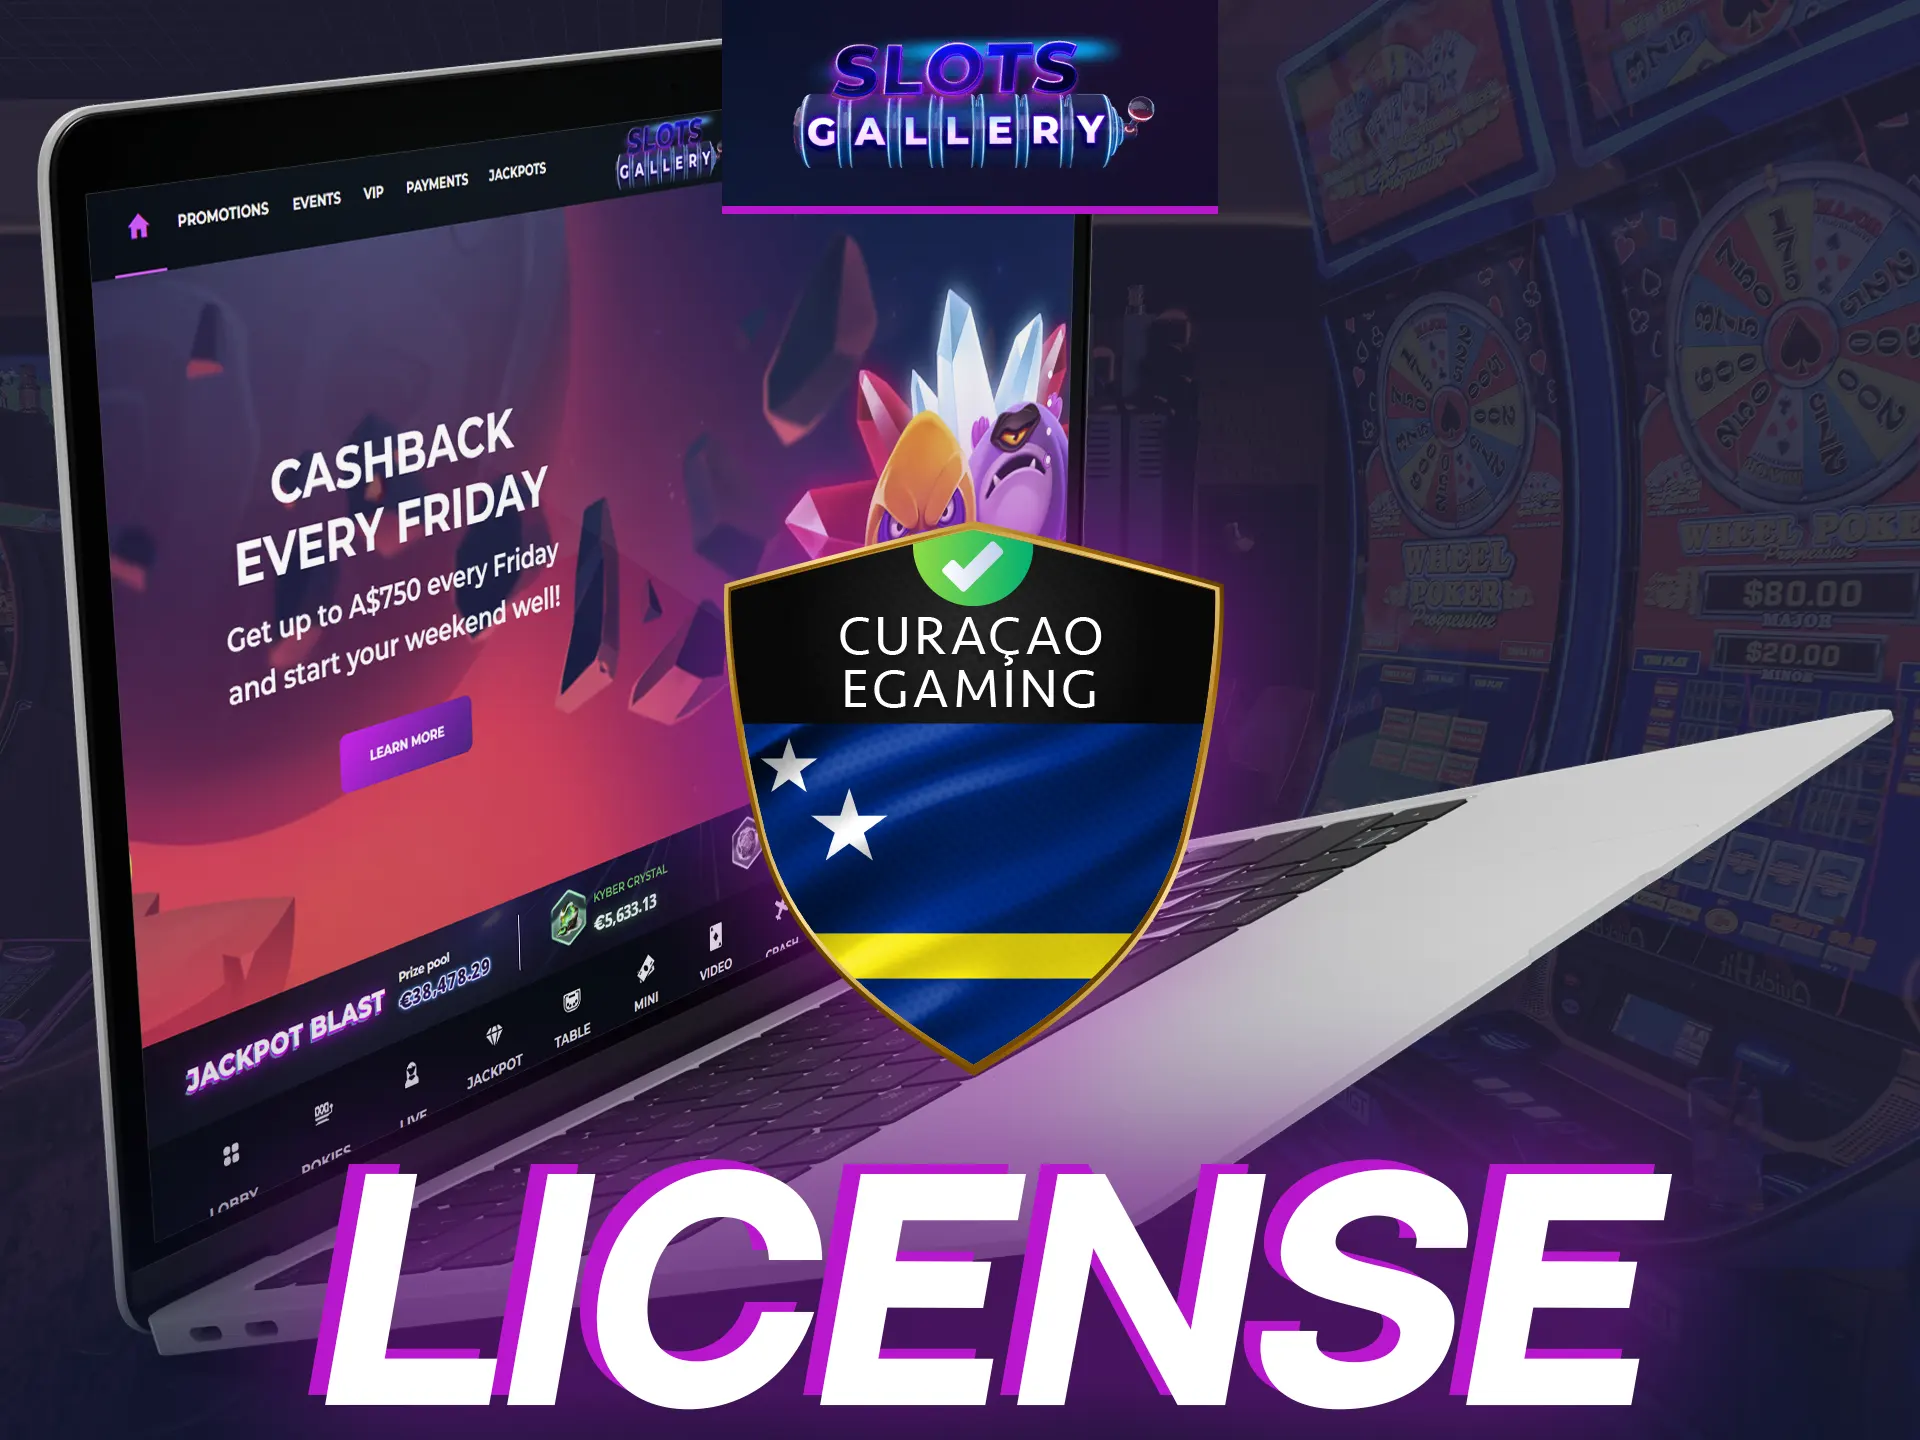 Slots Gallery online casino is licensed by Curacao.